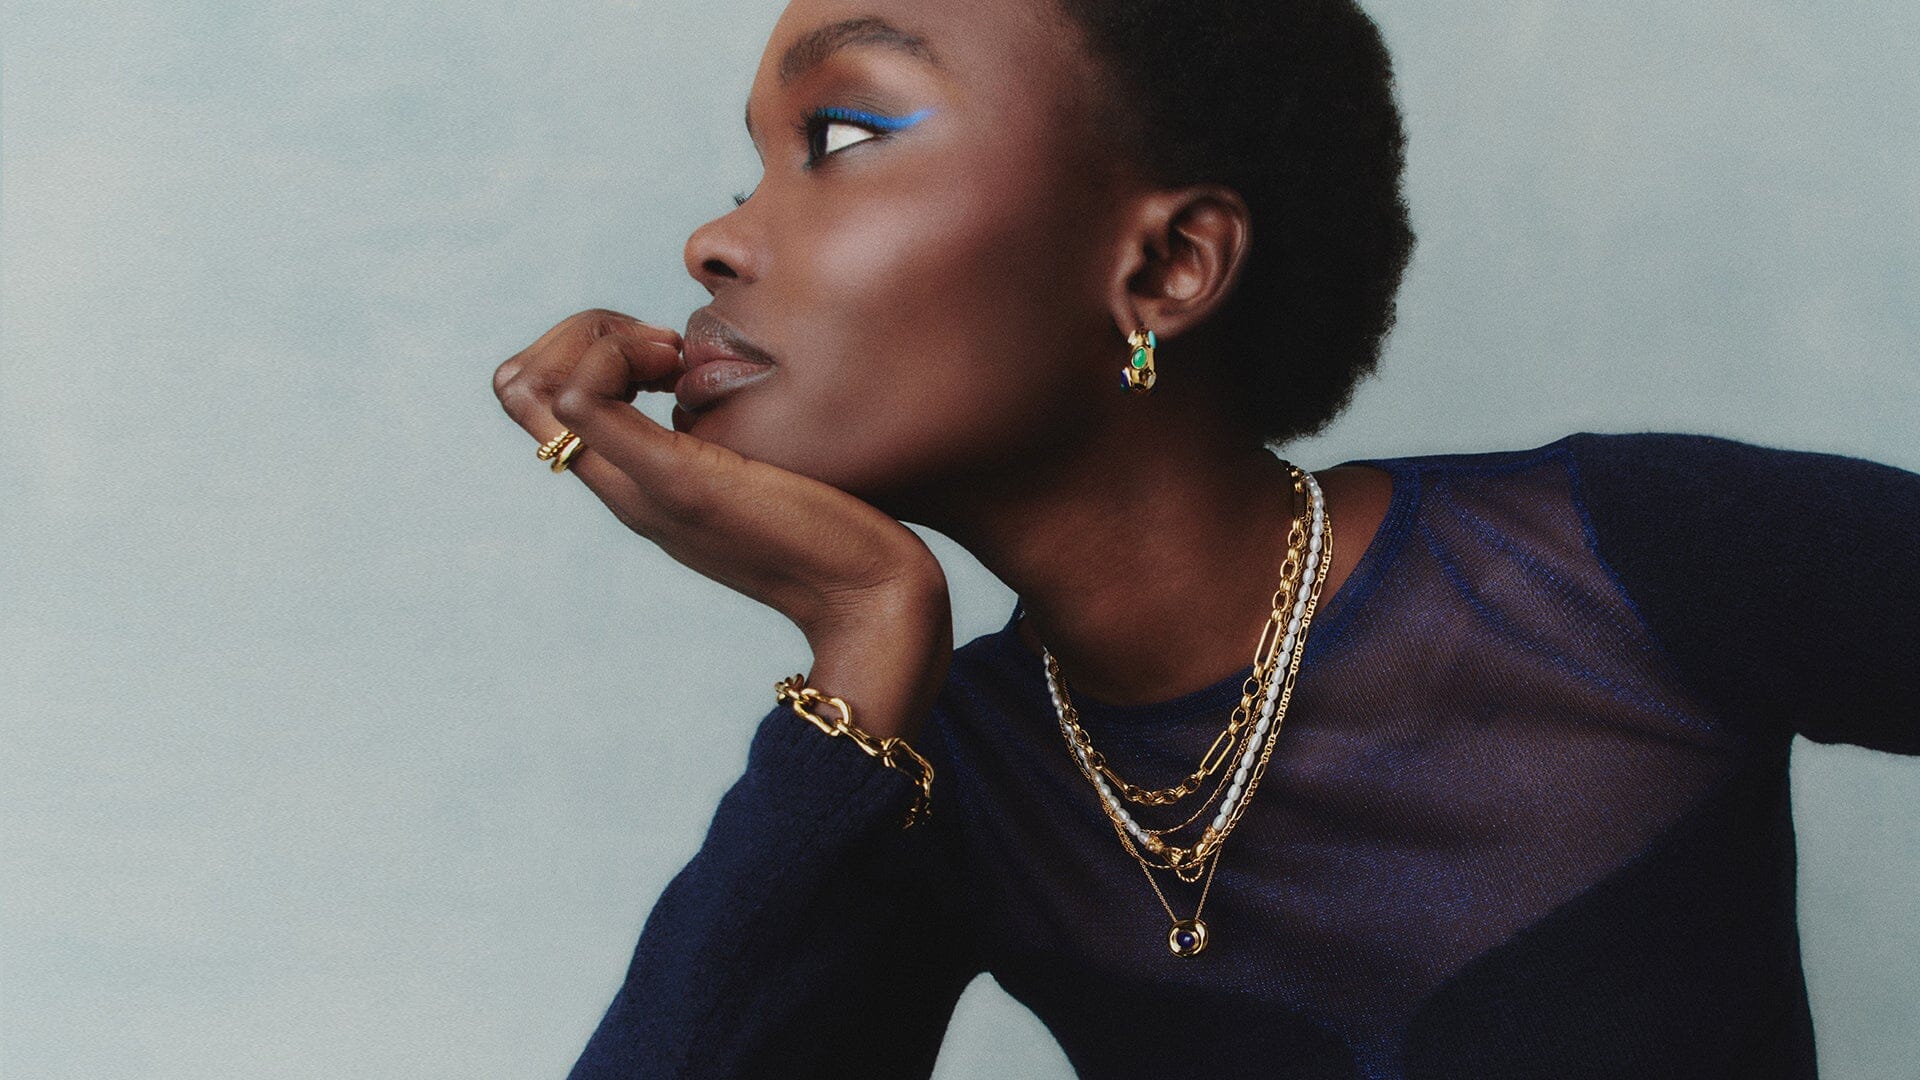 Lapis Lazuli: How to Wear This Meaningful Gemstone